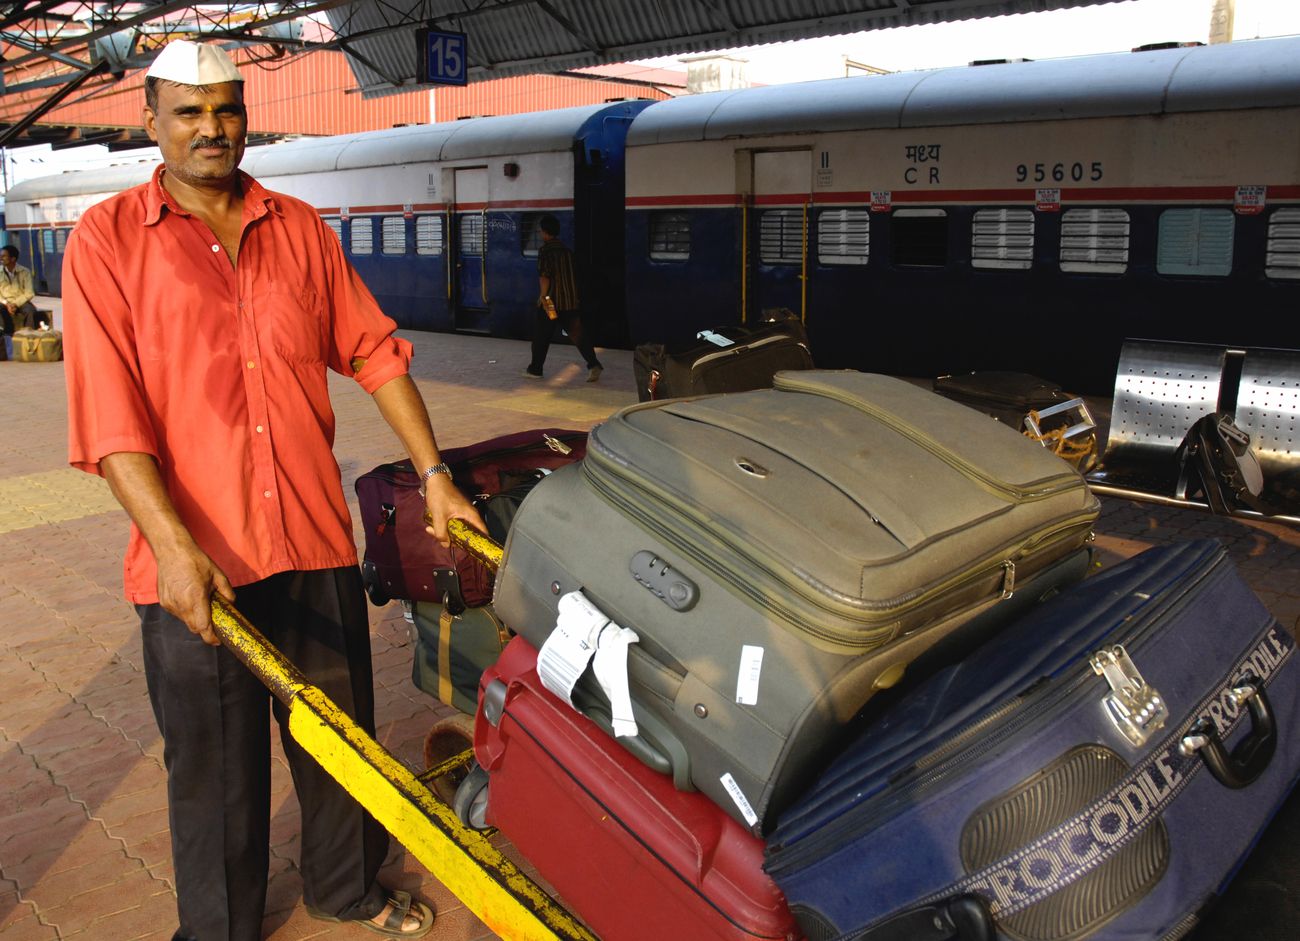 Porter (known as coolie in India) in red universal uniform carrying luggage of passengers at Mumbai Railway Station